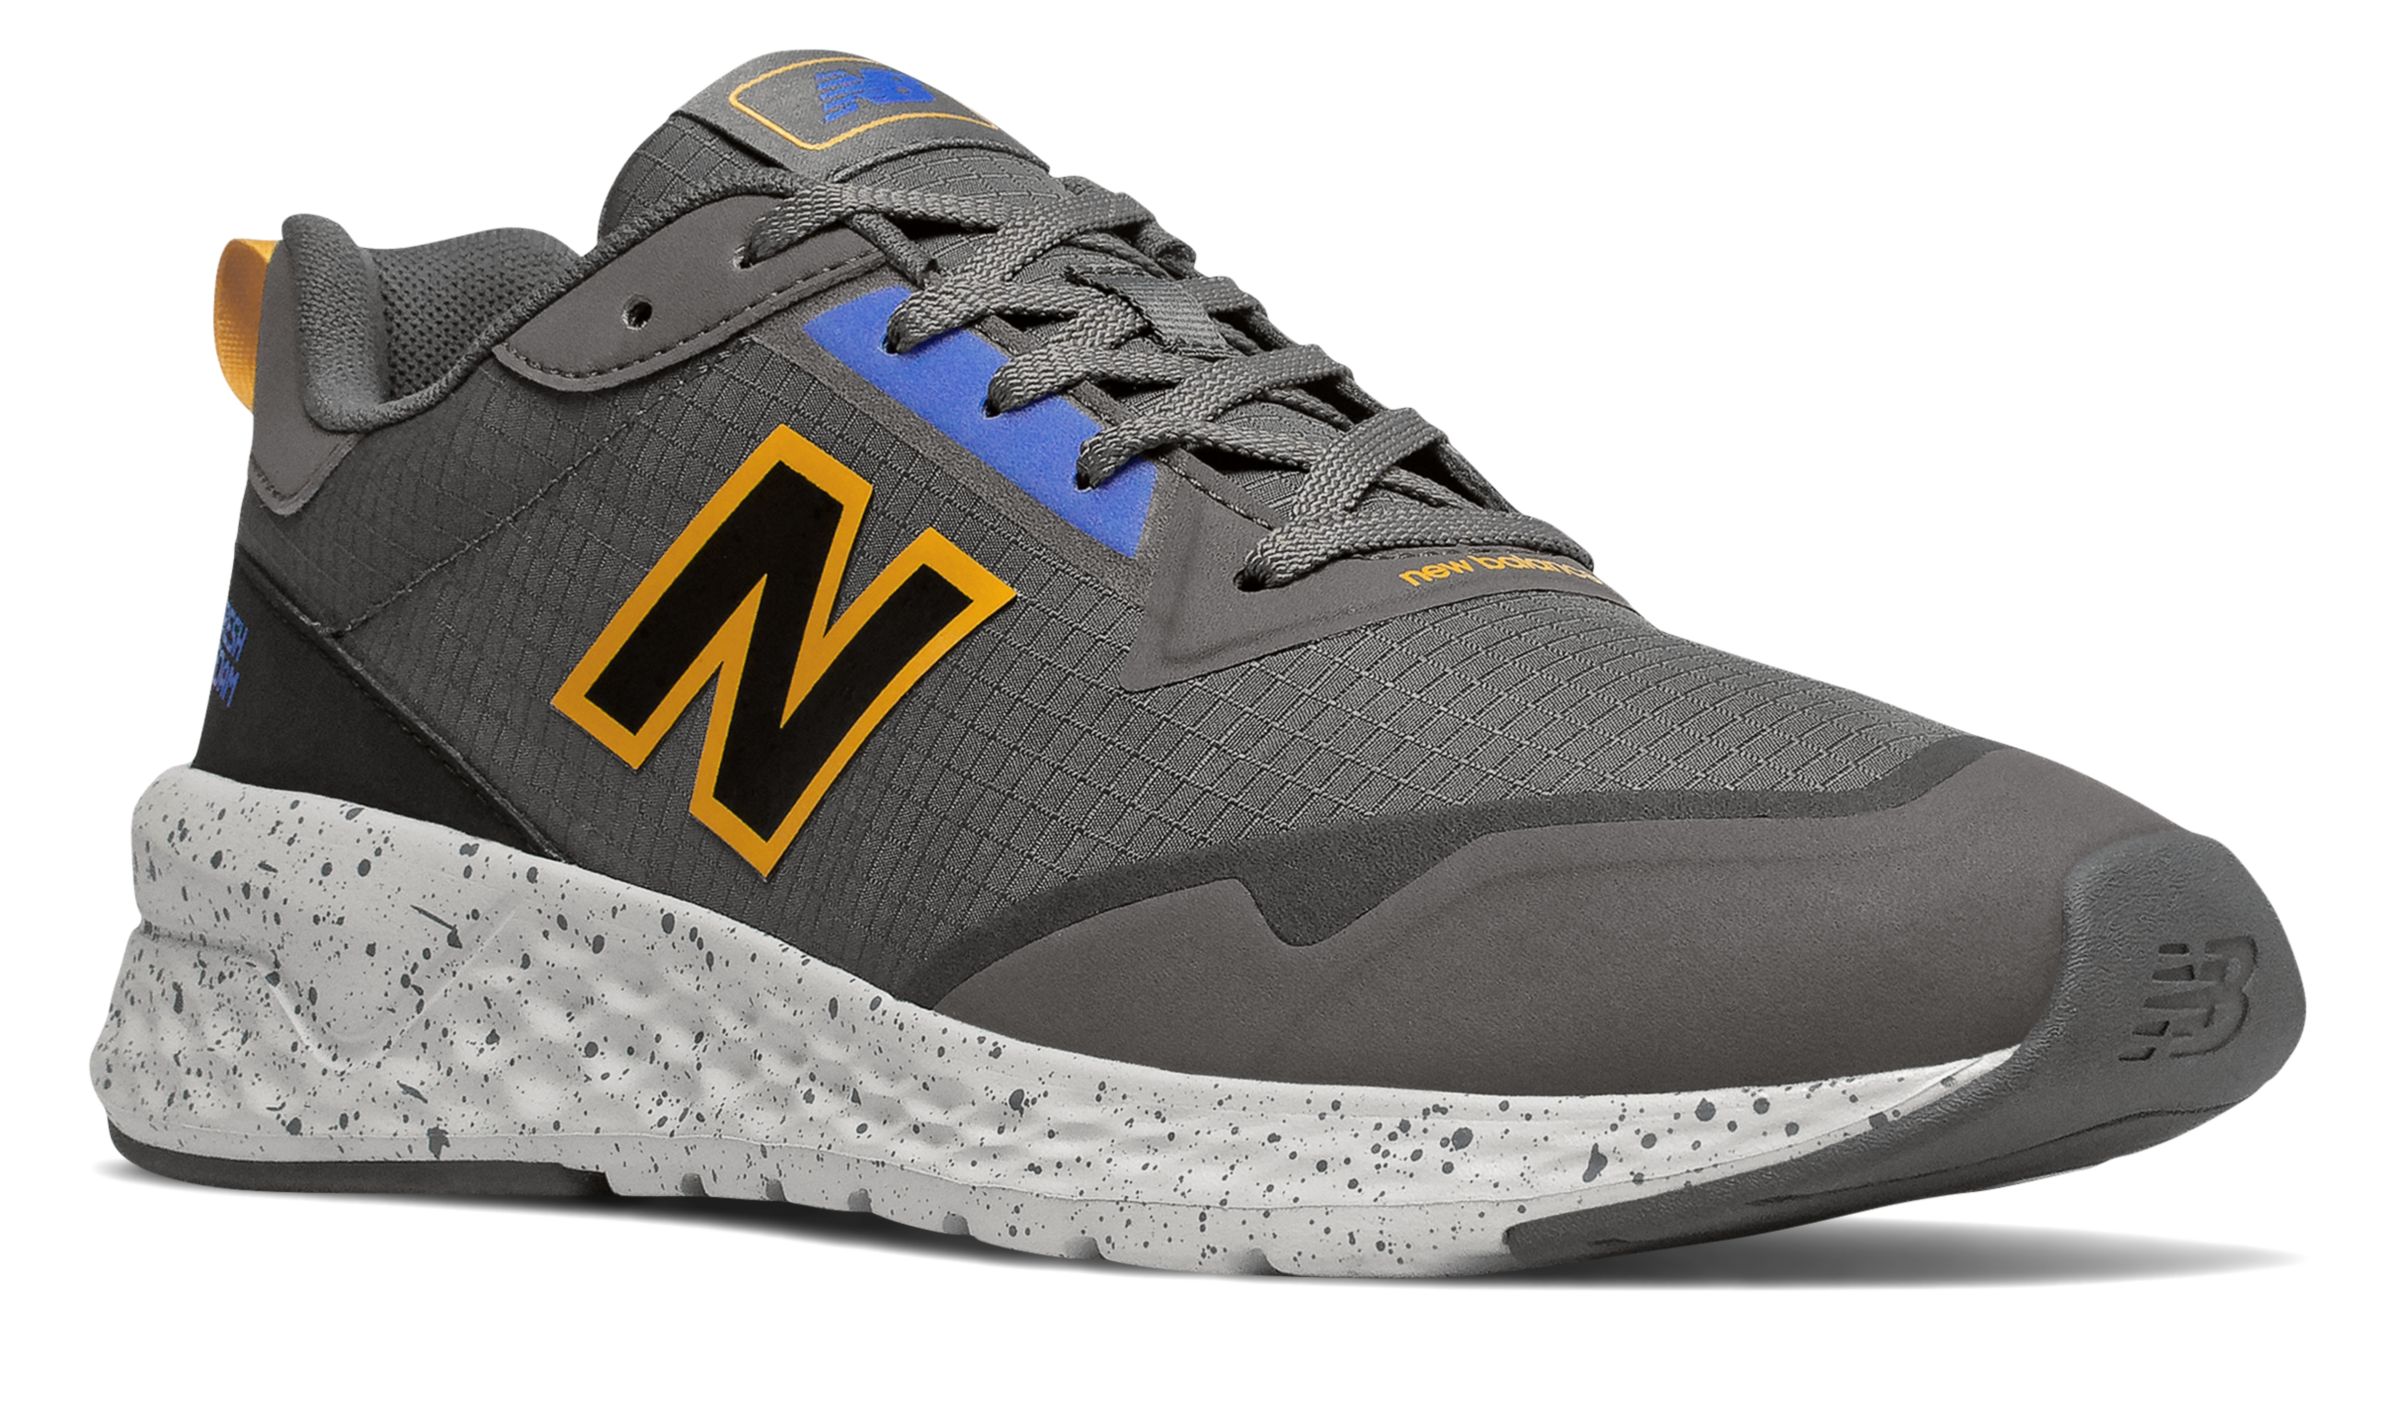 mike's new balance outlet